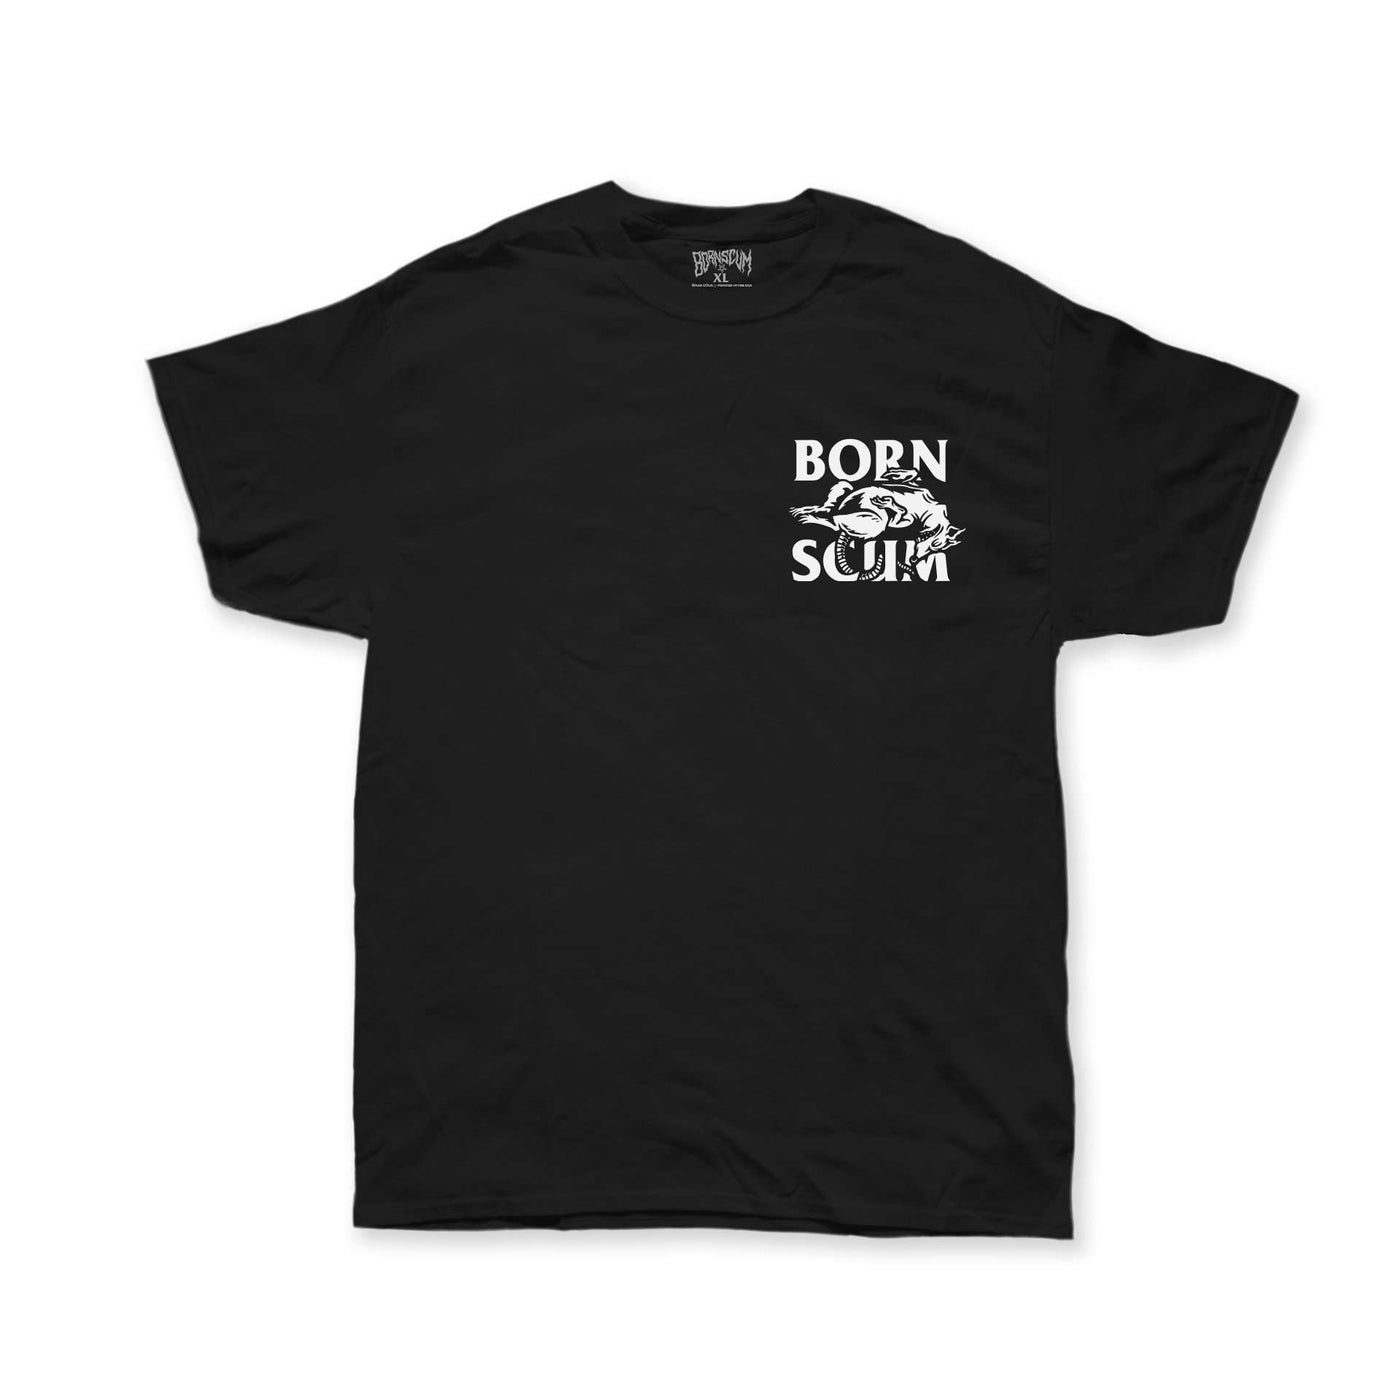 KEEP YOUR MOUTH SHUT T-SHIRT - Born Scum Clothing Co